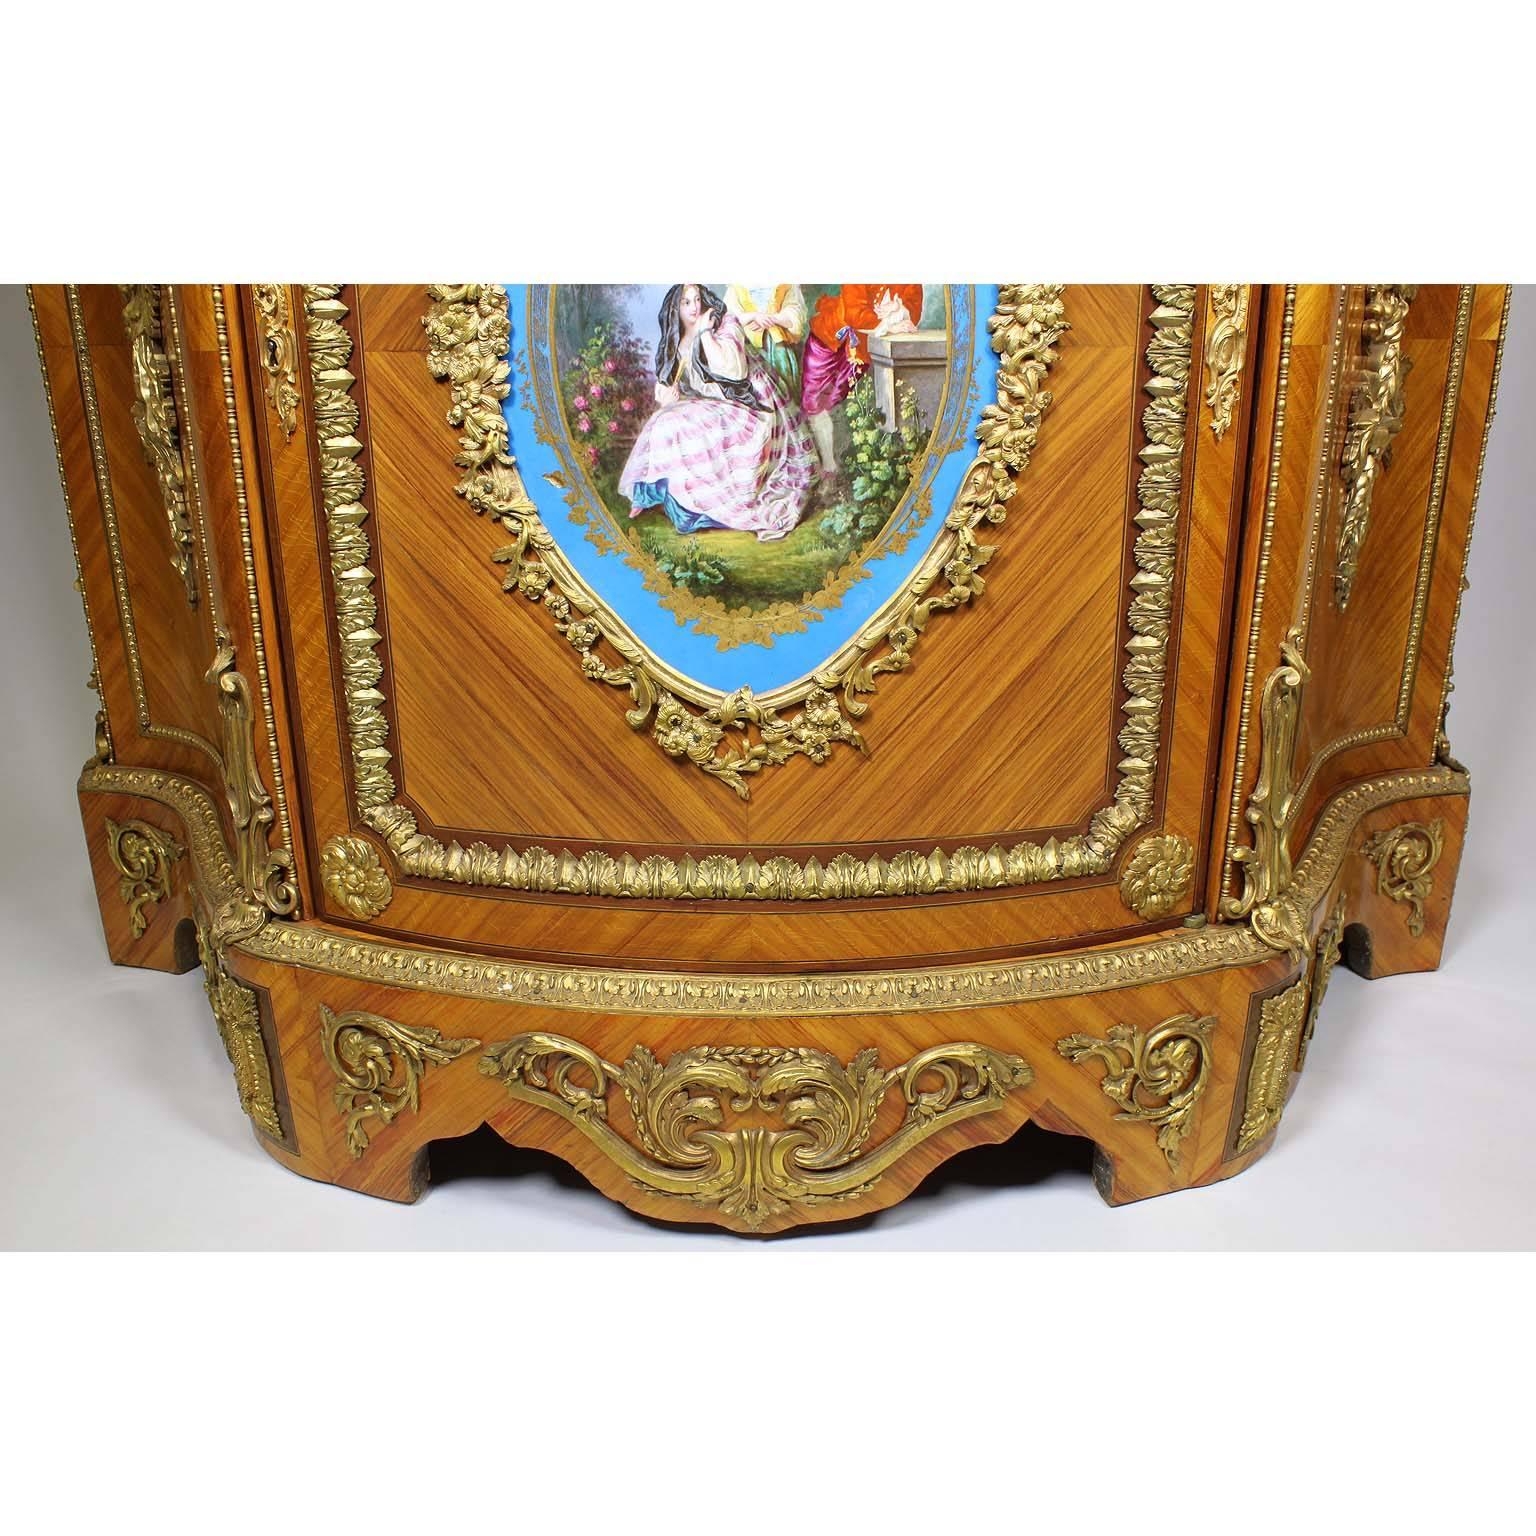 French Louis XVI Style Ormolu and Sèvres Style Porcelain Mounted Meuble d'Appui  1